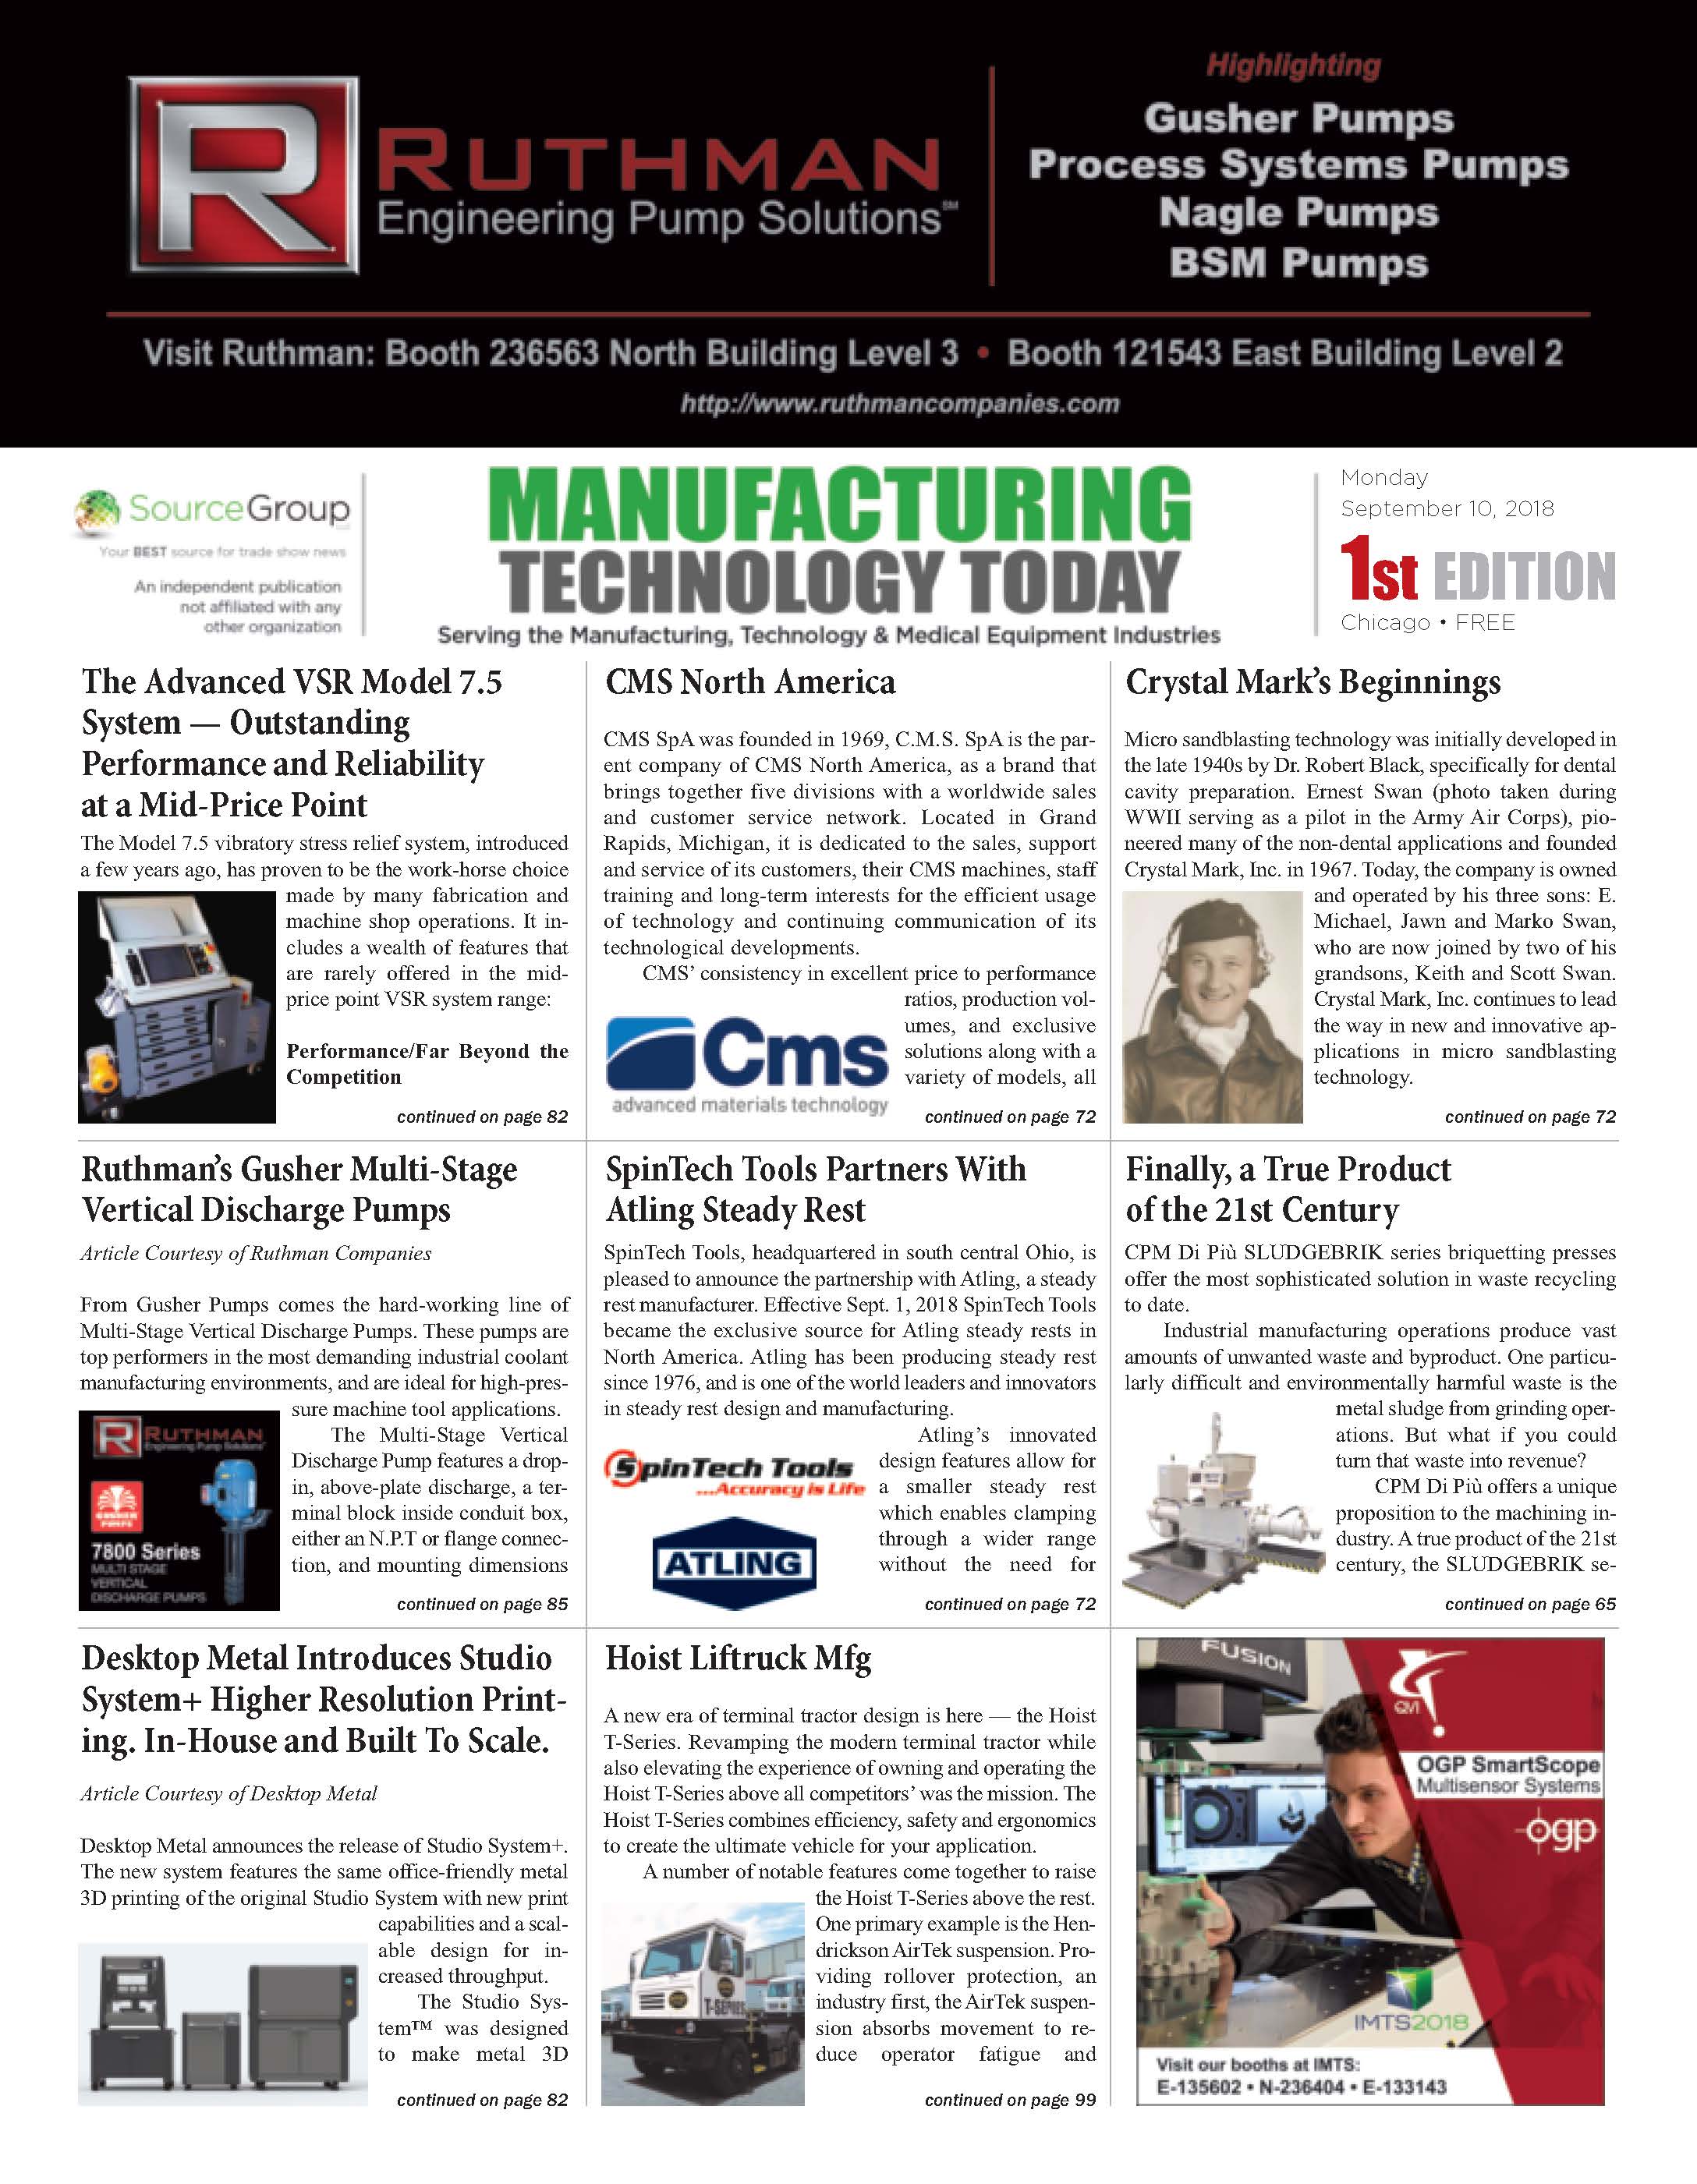 manufacturing technology today